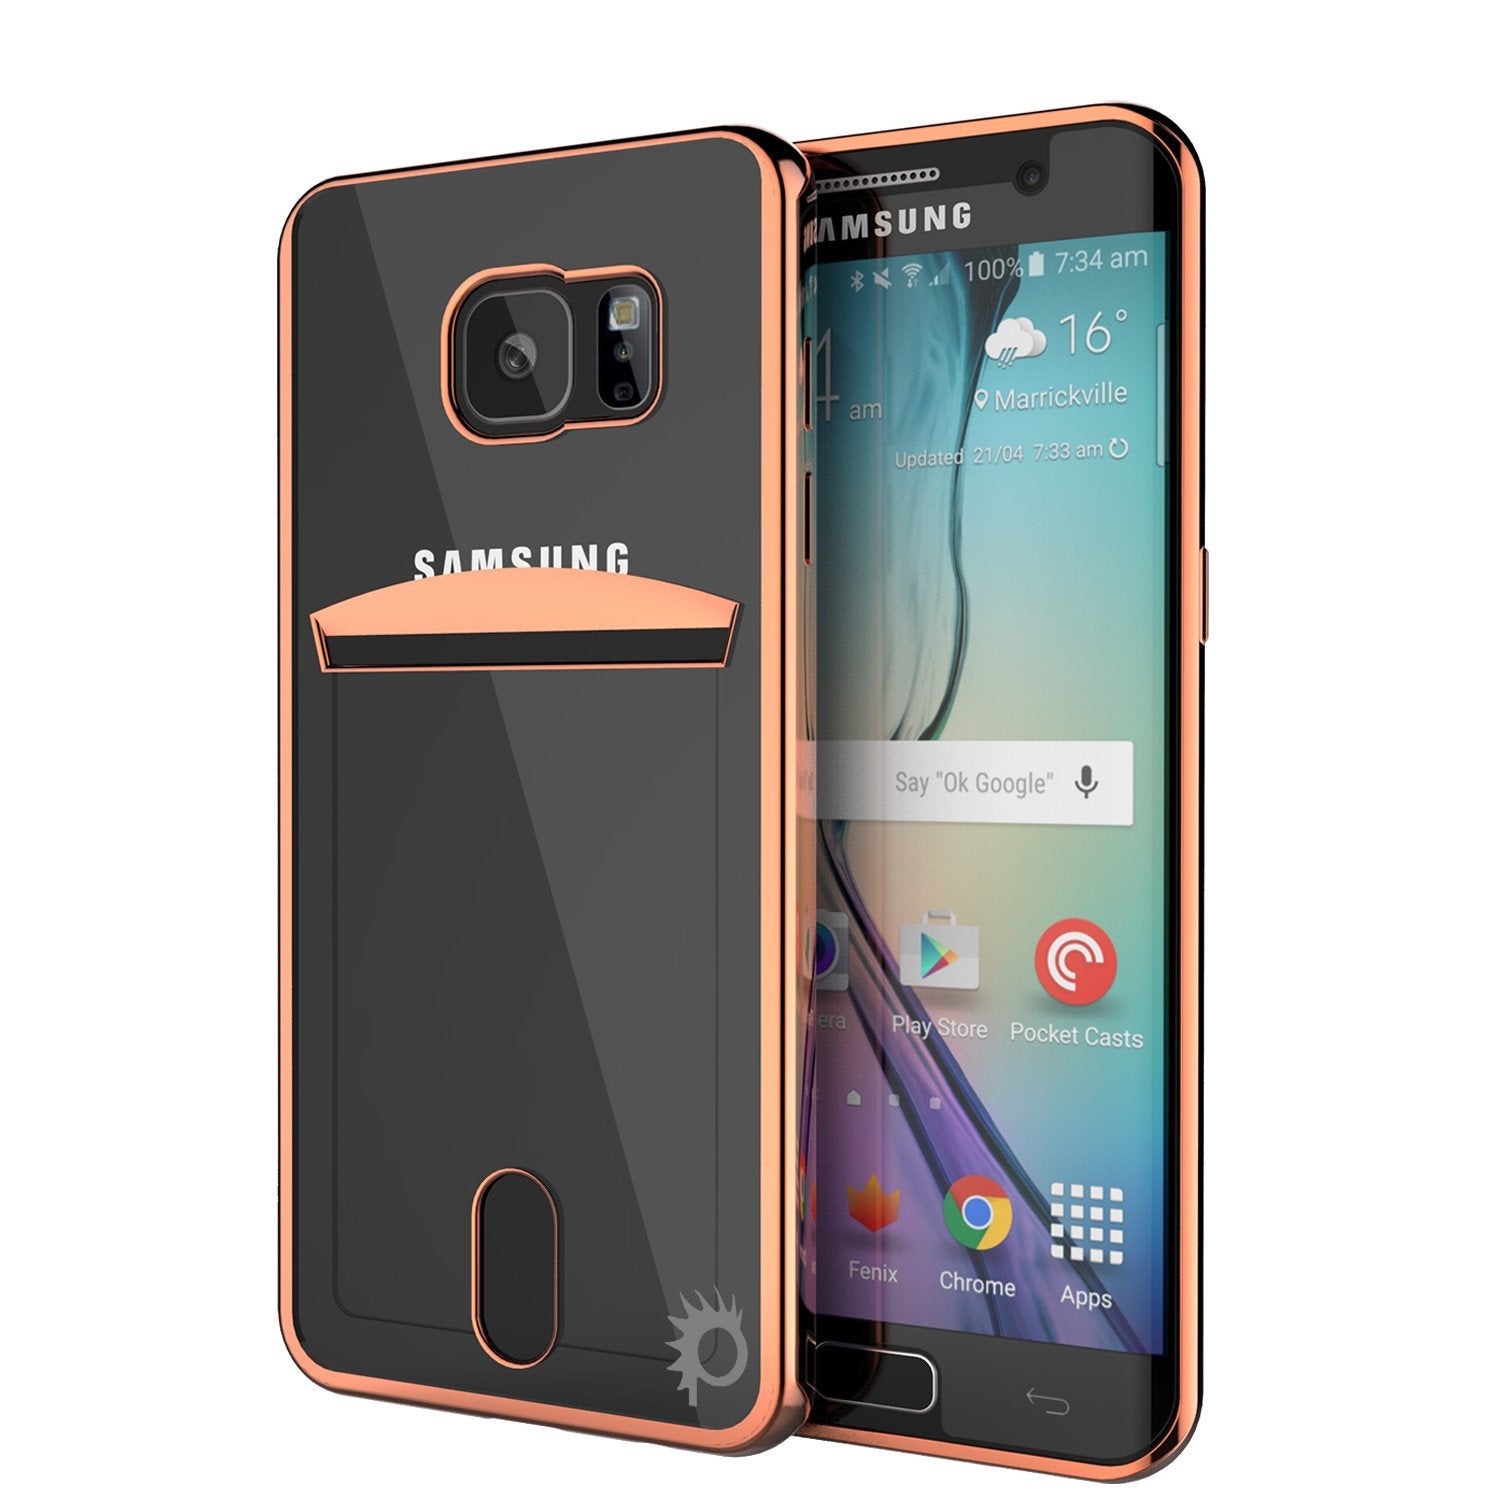 Galaxy S6 EDGE Case, PUNKCASE® LUCID Rose Gold Series | Card Slot | SHIELD Screen Protector